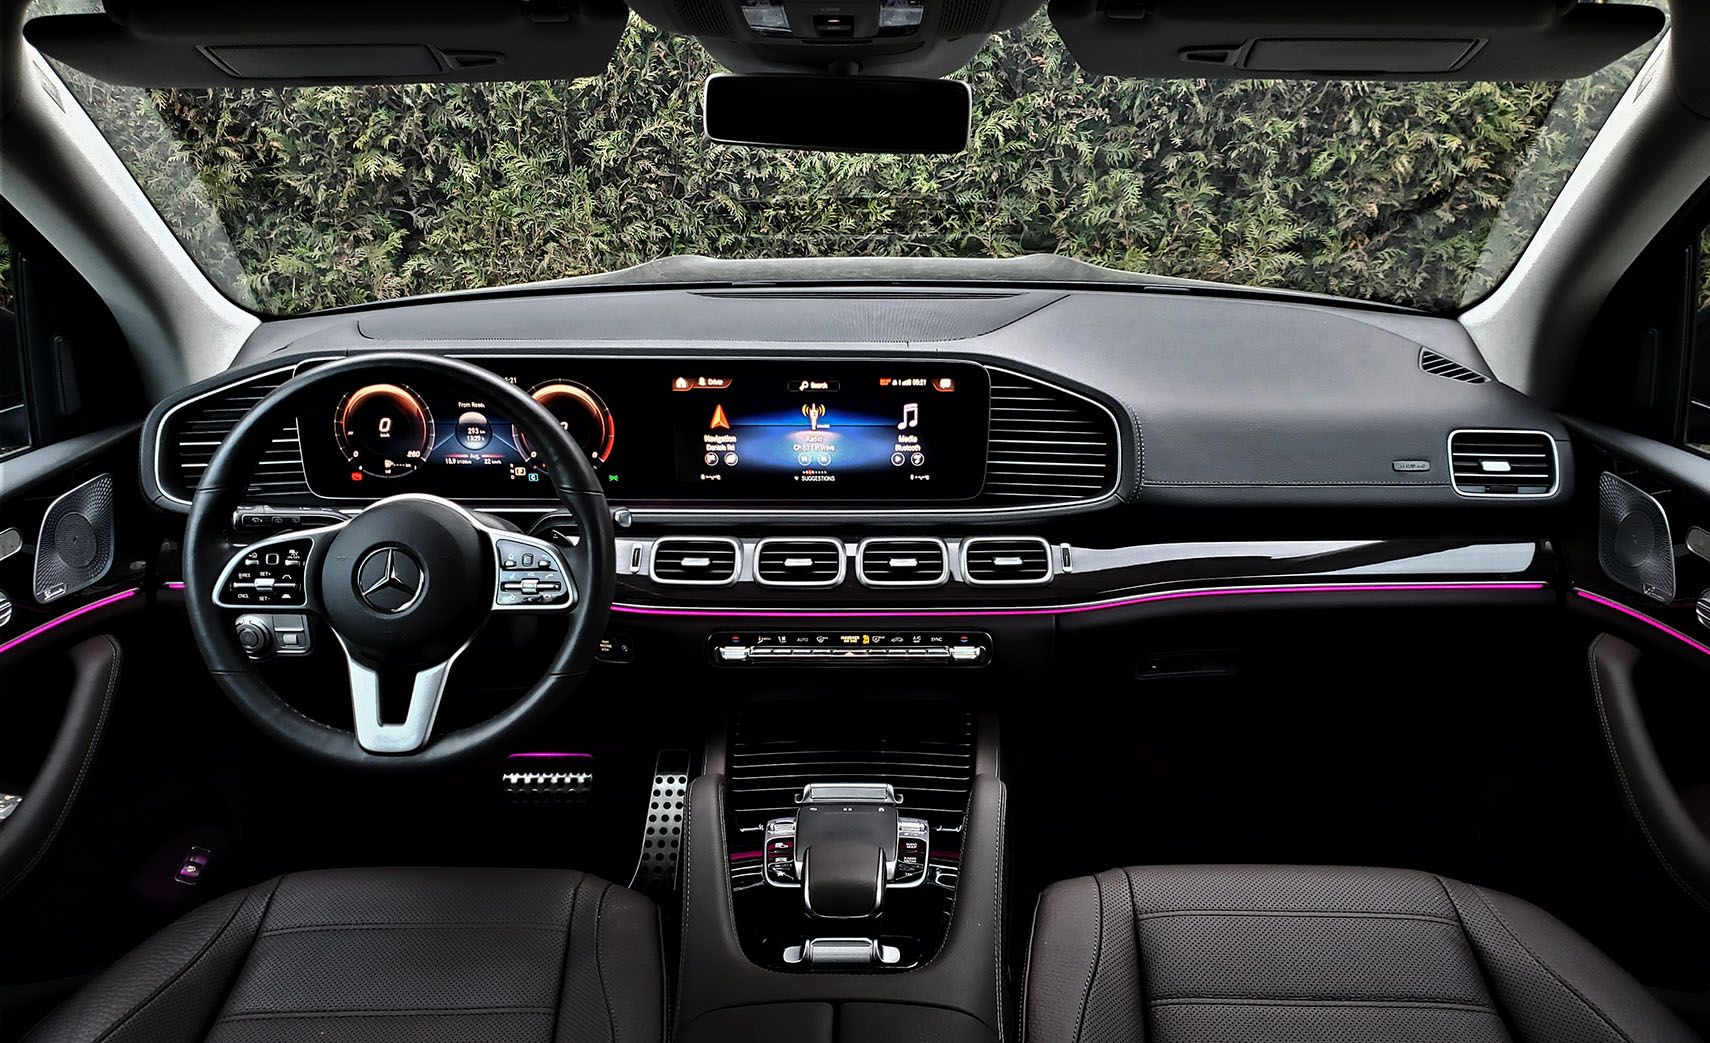 Instrument panels don't get any more high-tech than this.